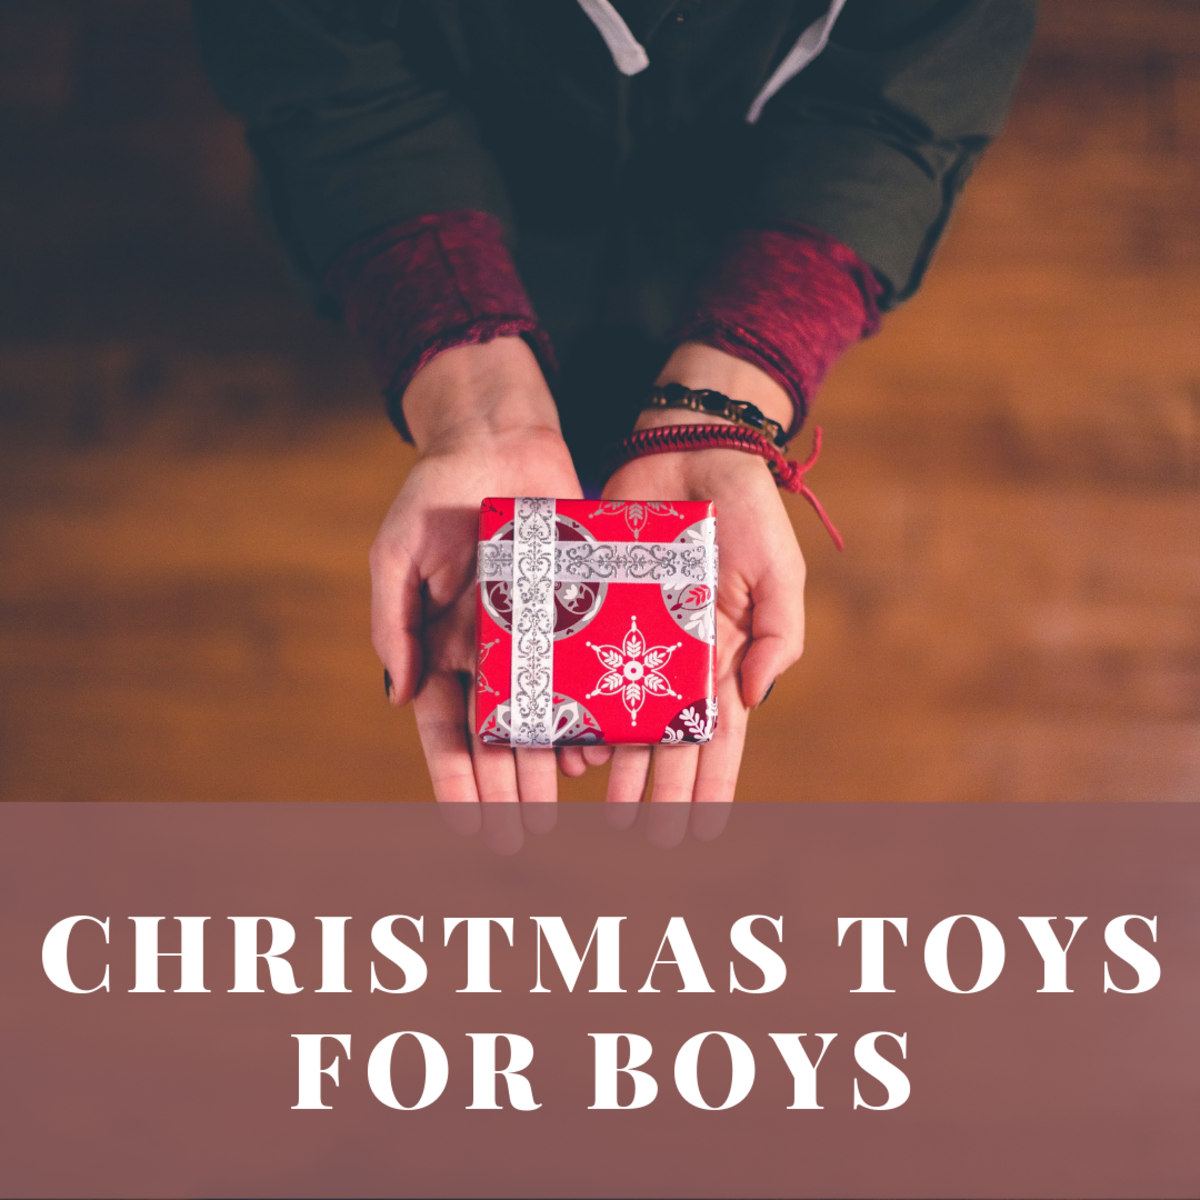 The 10 Top Boy's Toys for Christmas